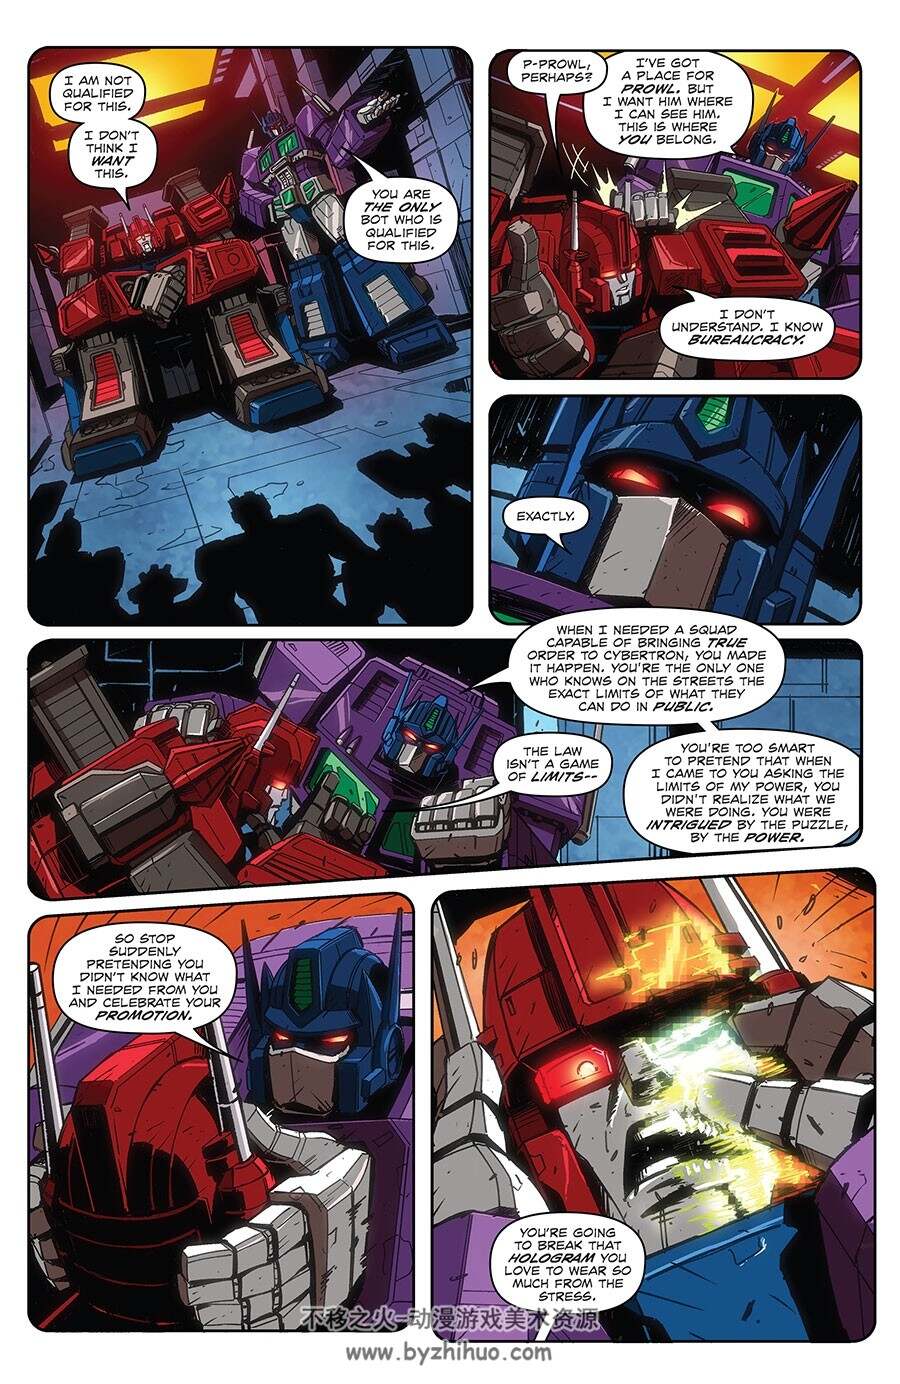 Transformers Shattered Glass II 第1册 Danny Lore 漫画下载